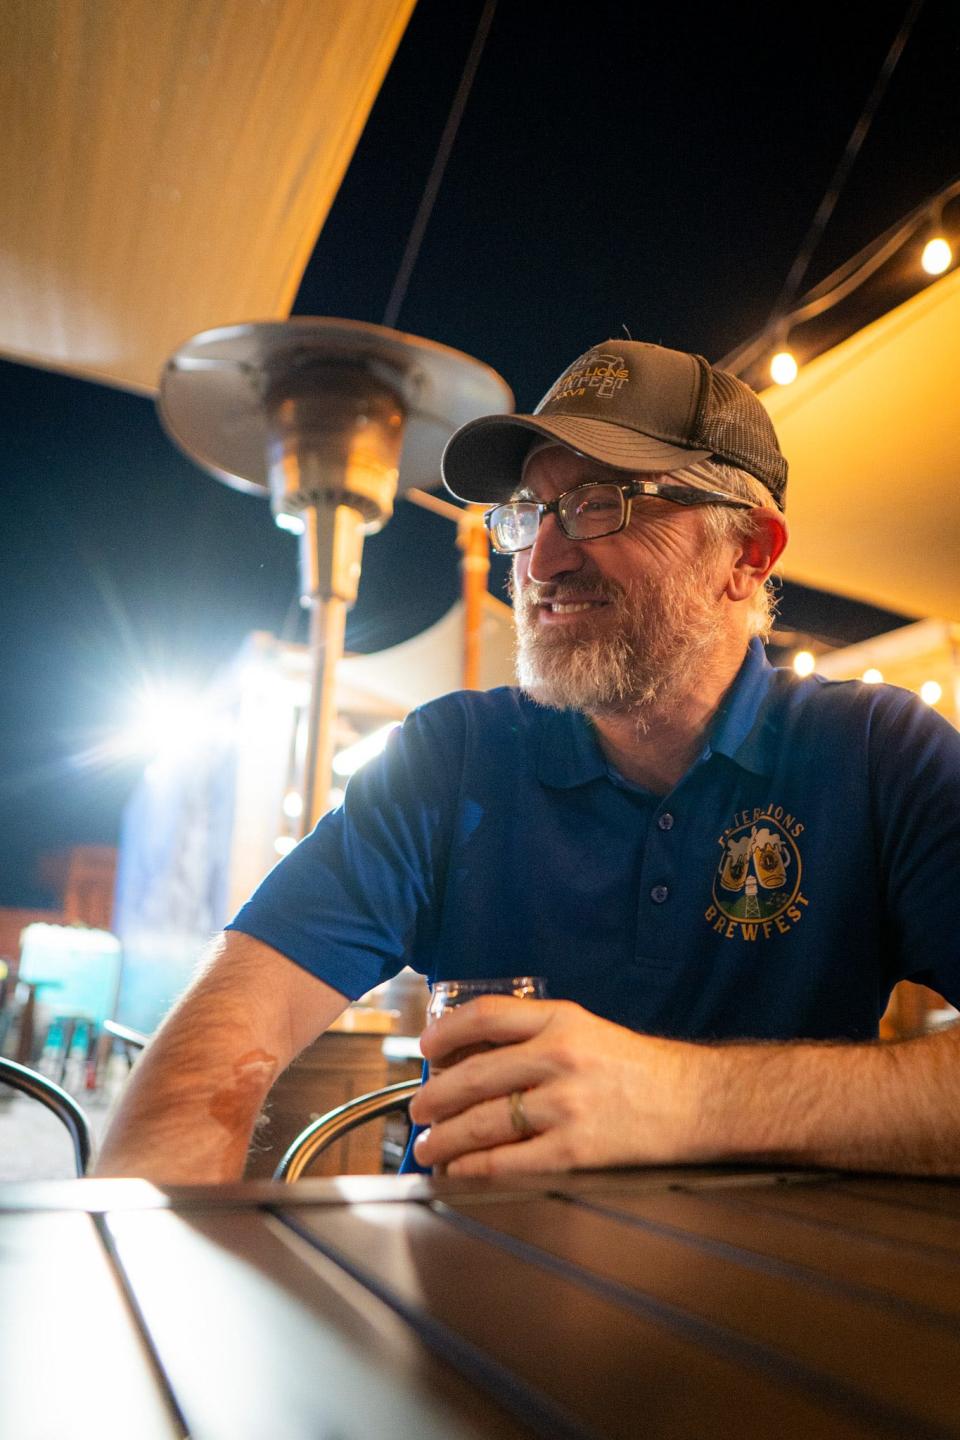 Neal Hickey is the new committee chair for the Exeter Lions Club annual Brewfest. He is taking over for Terry Miller, who started the event and helped run it for the past 27 years.